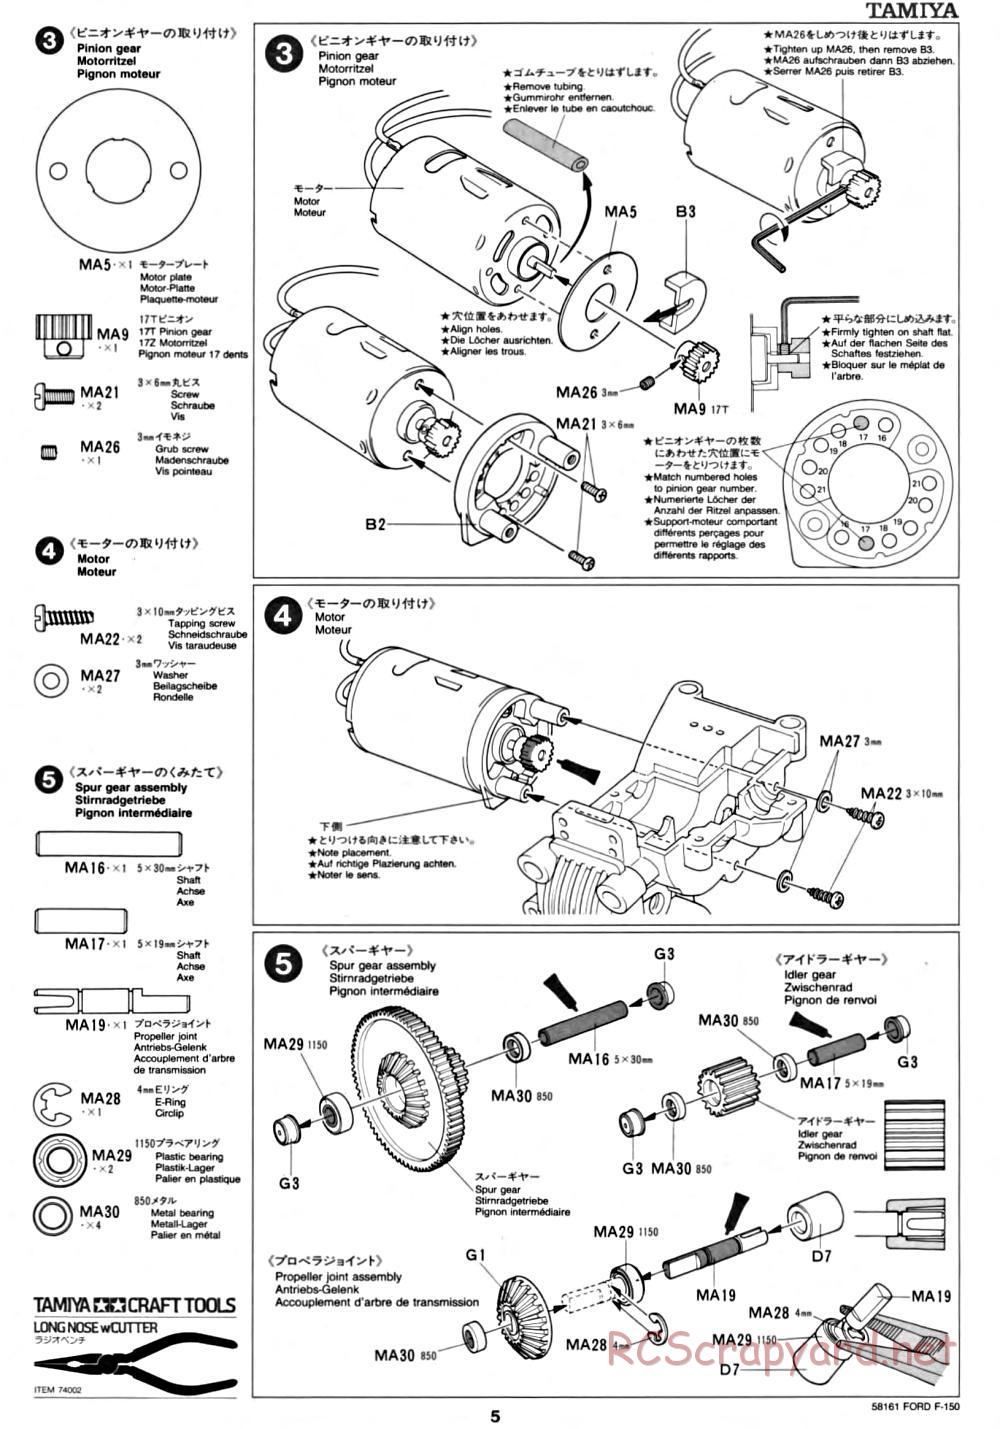 Tamiya - Ford F-150 Truck Chassis - Manual - Page 5